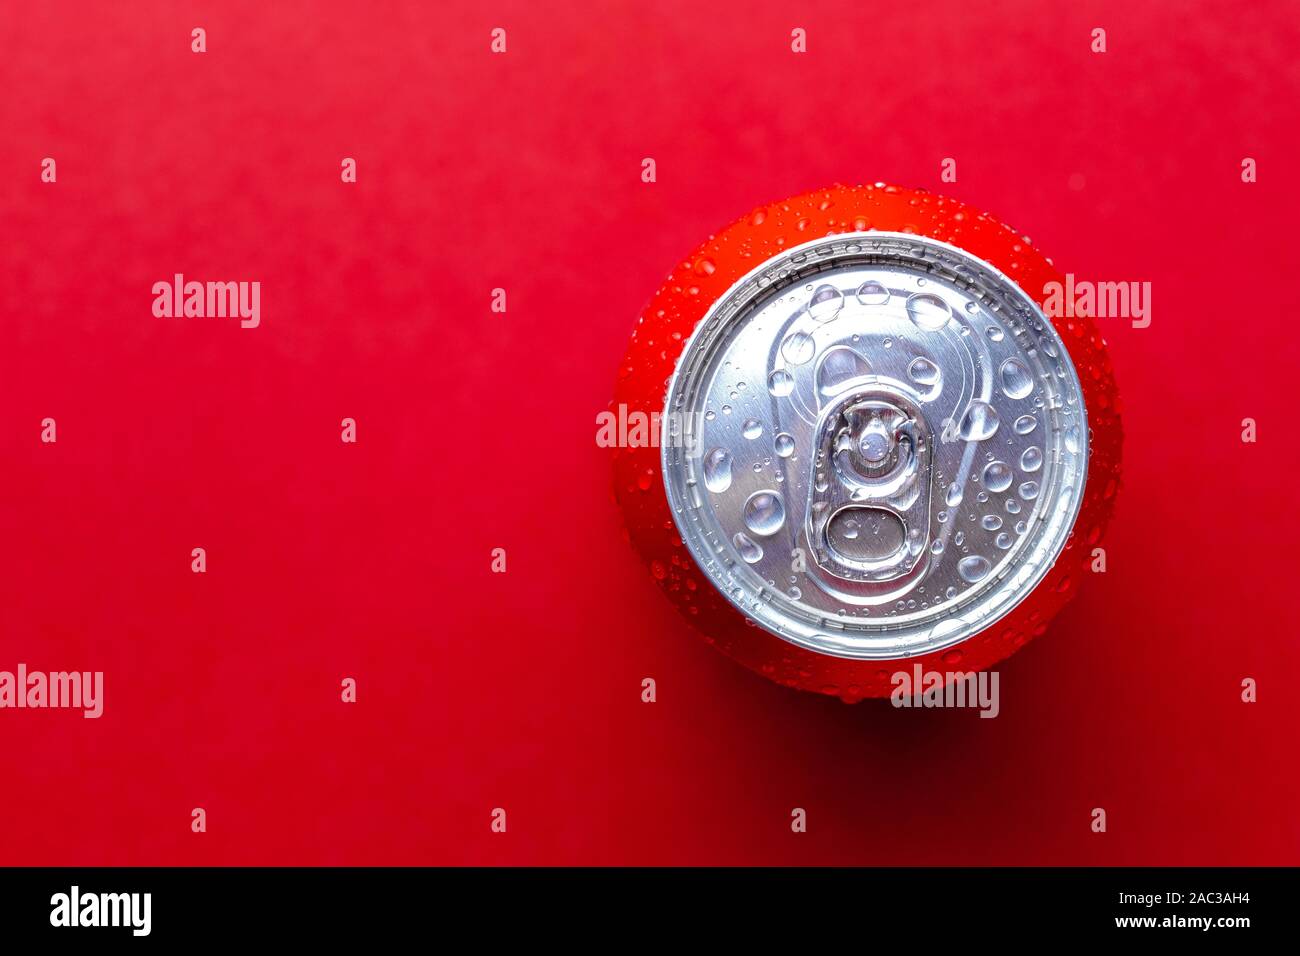 Beverages soda can with condensation drops over red background with place for text Stock Photo